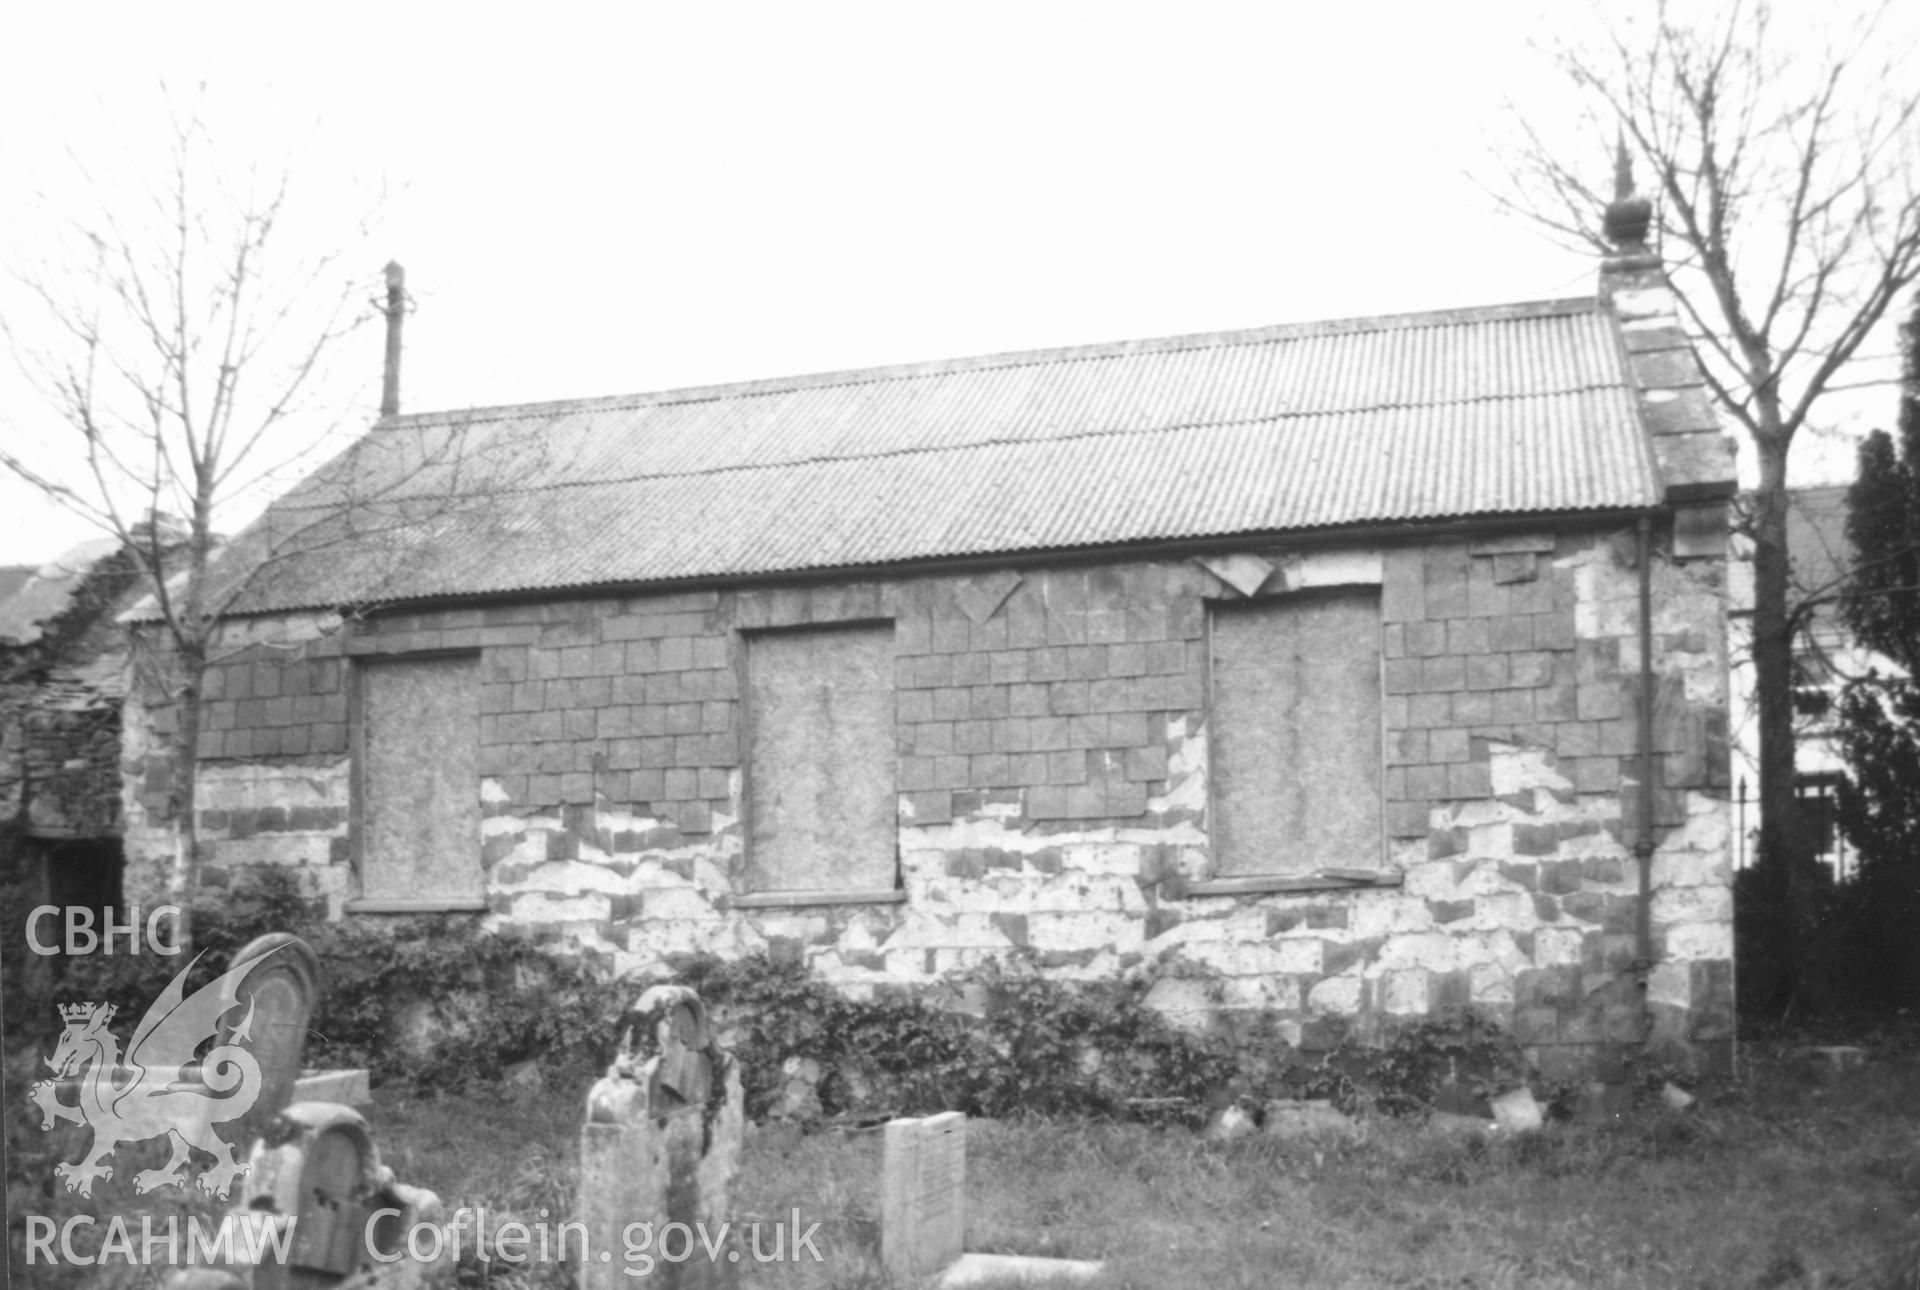 Digital copy of a black and white photograph showing an exterior view of Macpelah Baptist Chapel, Haverfordwest, taken by Robert Scourfield, c.1996.